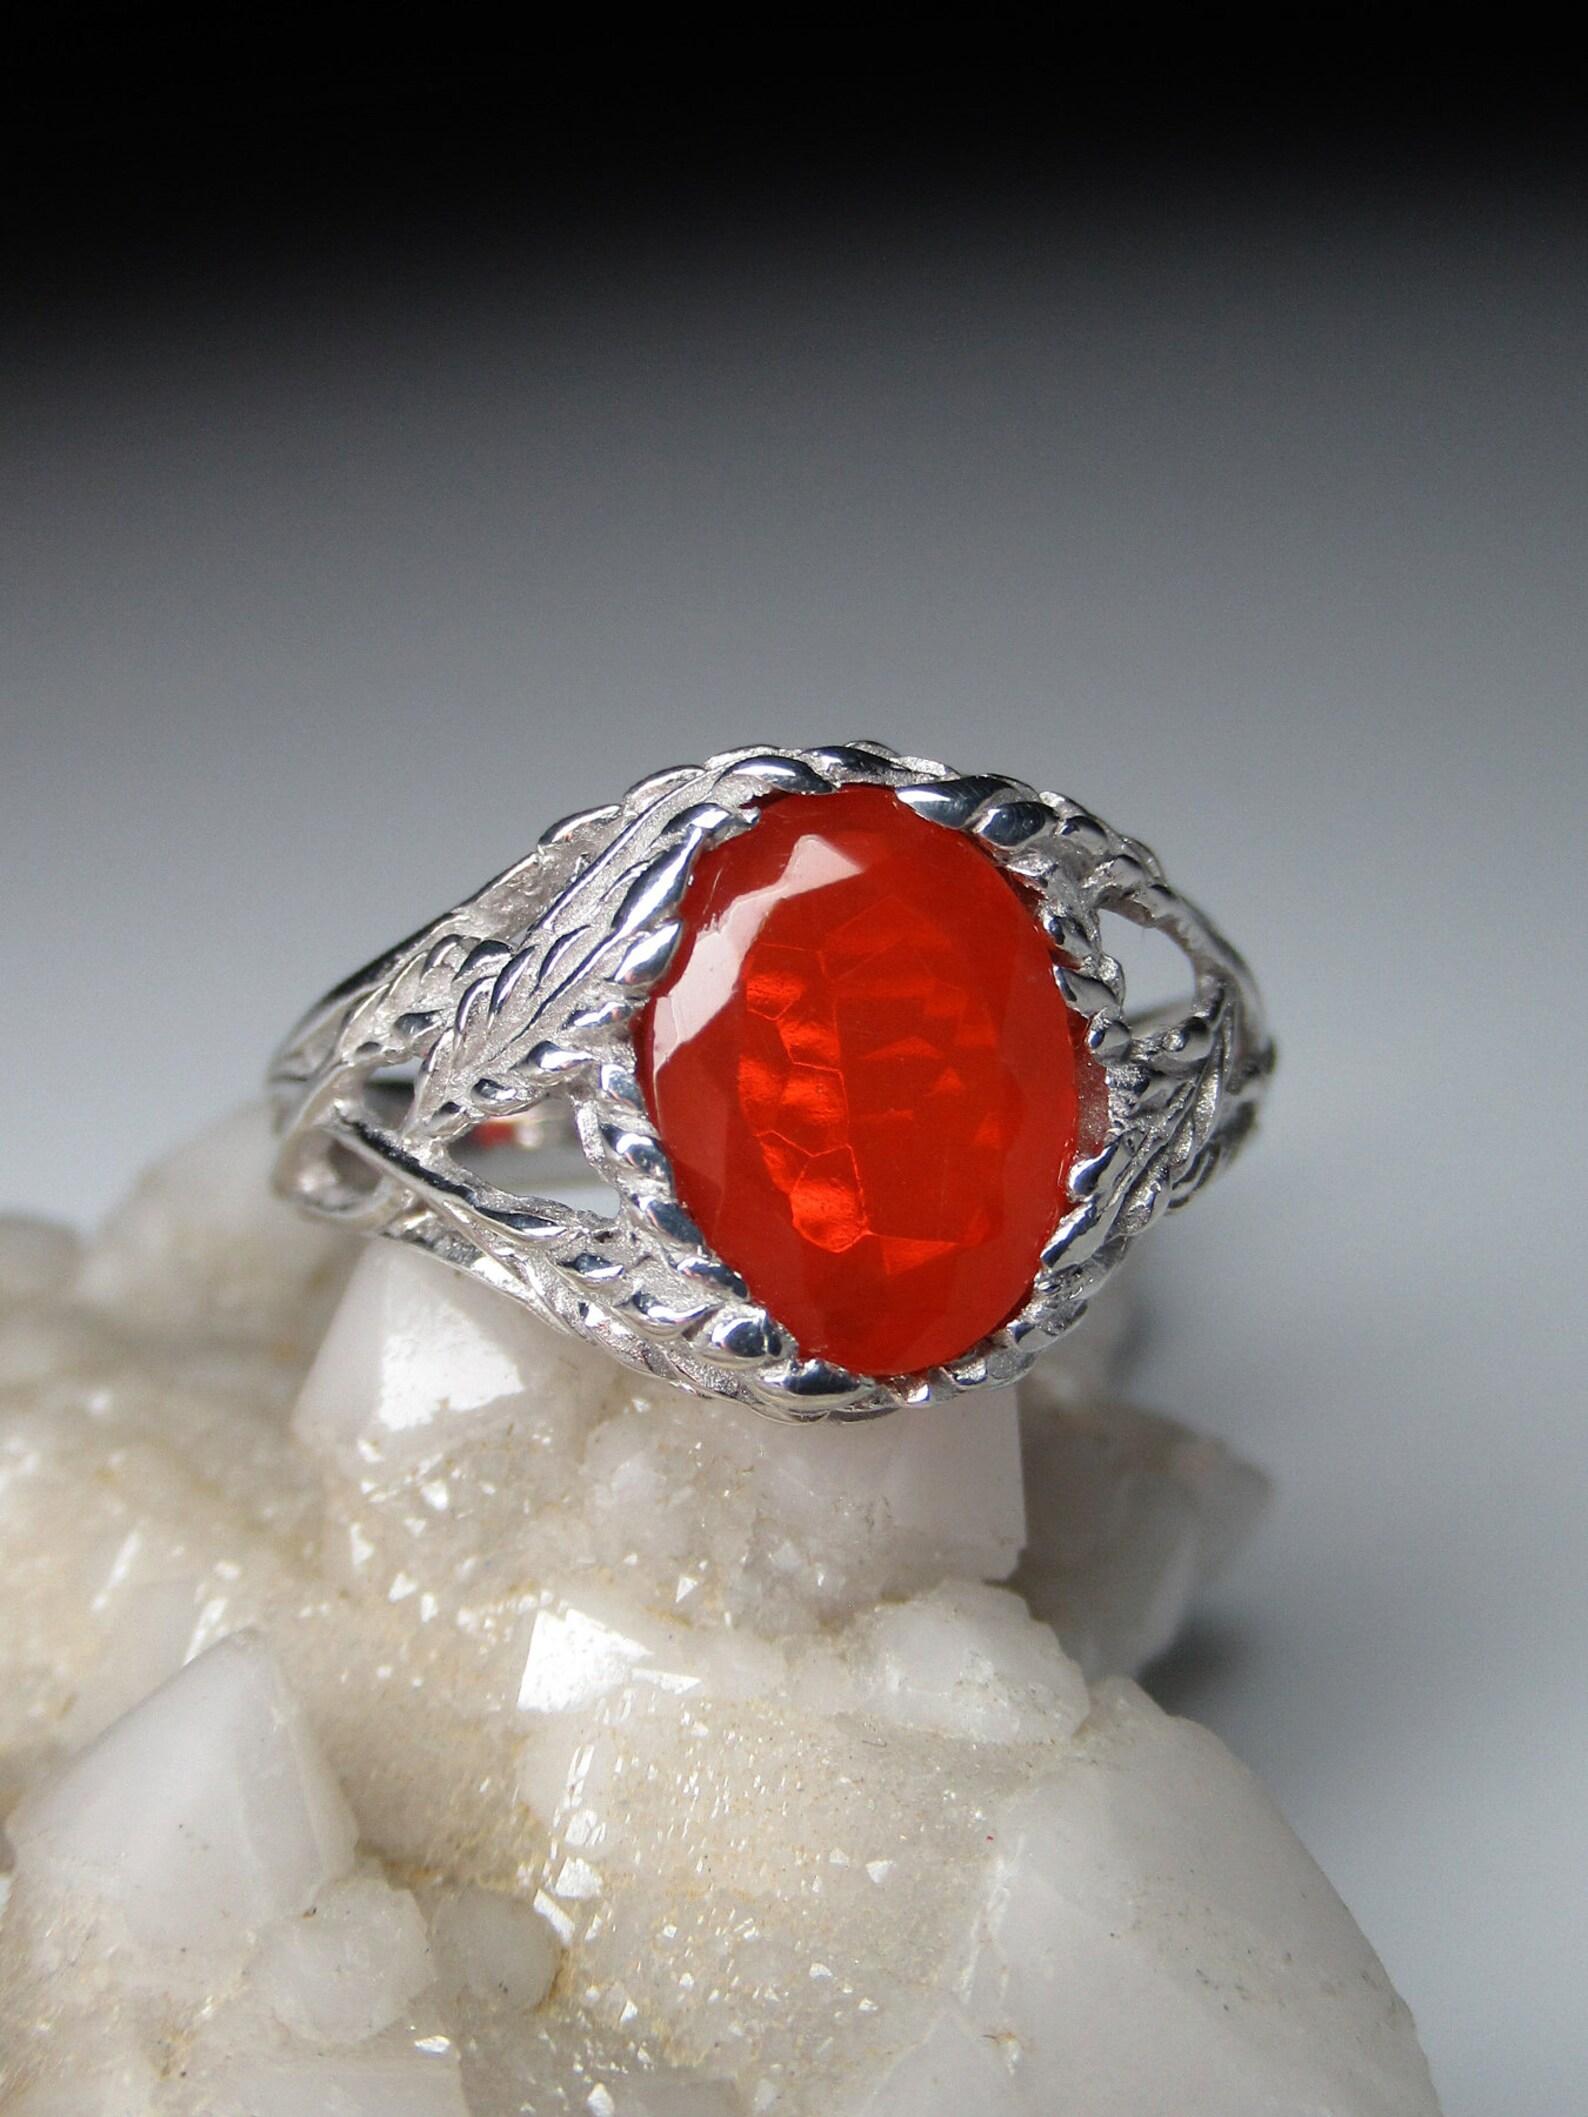 Silver ring with natural Fire Opal 
gemstone origin - Mexico
opal measurements - 0.079 x 0.28 x 0.35 in / 2 x 7 x 9 mm
opal weight - 0.93 carat
ring size - 7.5 US
ring weight - 2.2 grams